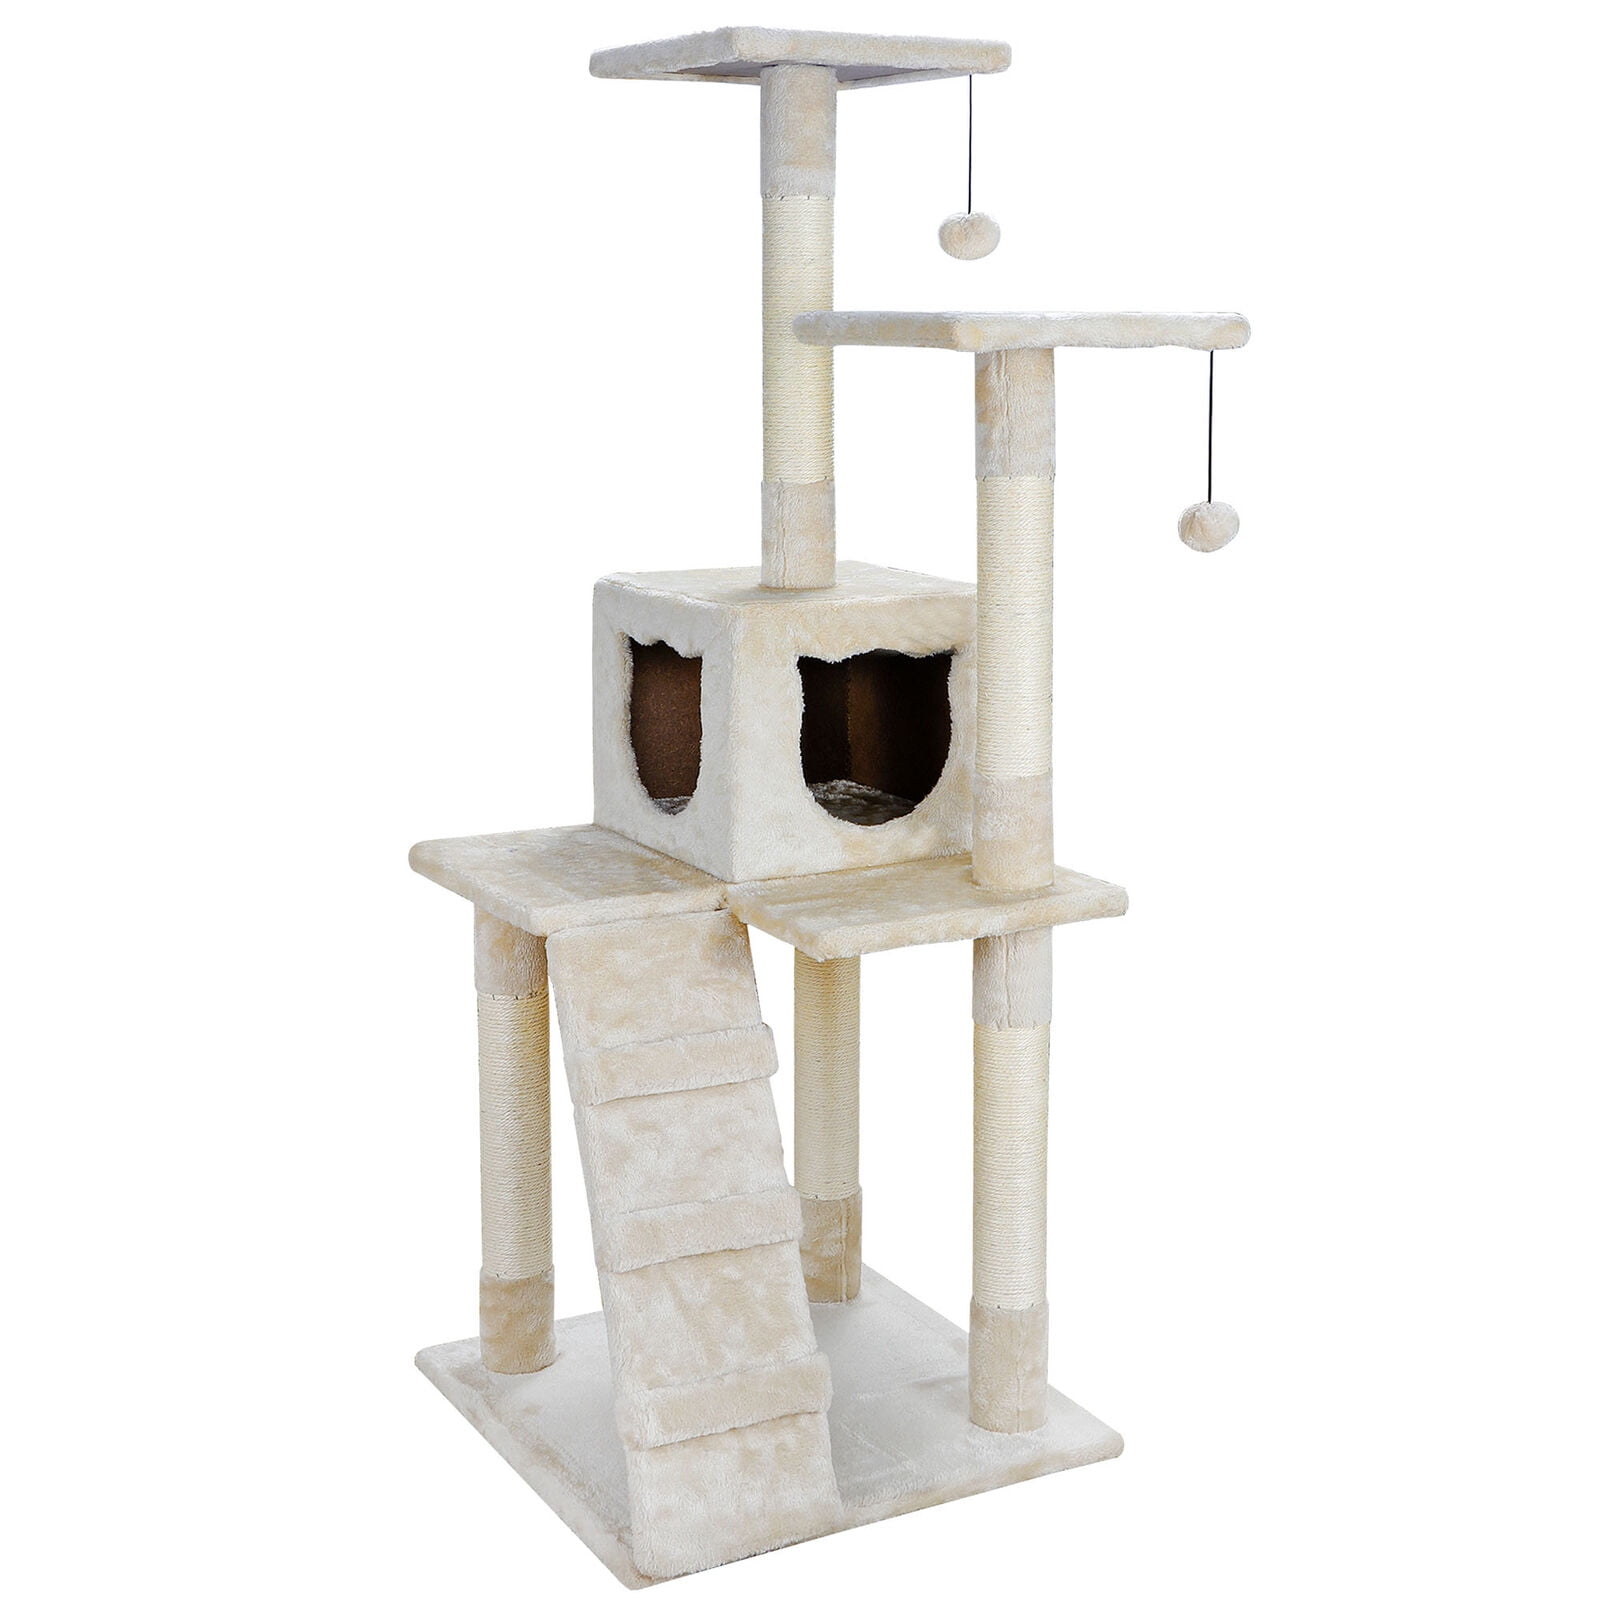 52" 60" 80 Cat Tree Tower Condo Furniture Scratch Post Pet Tree Kitty Play House 